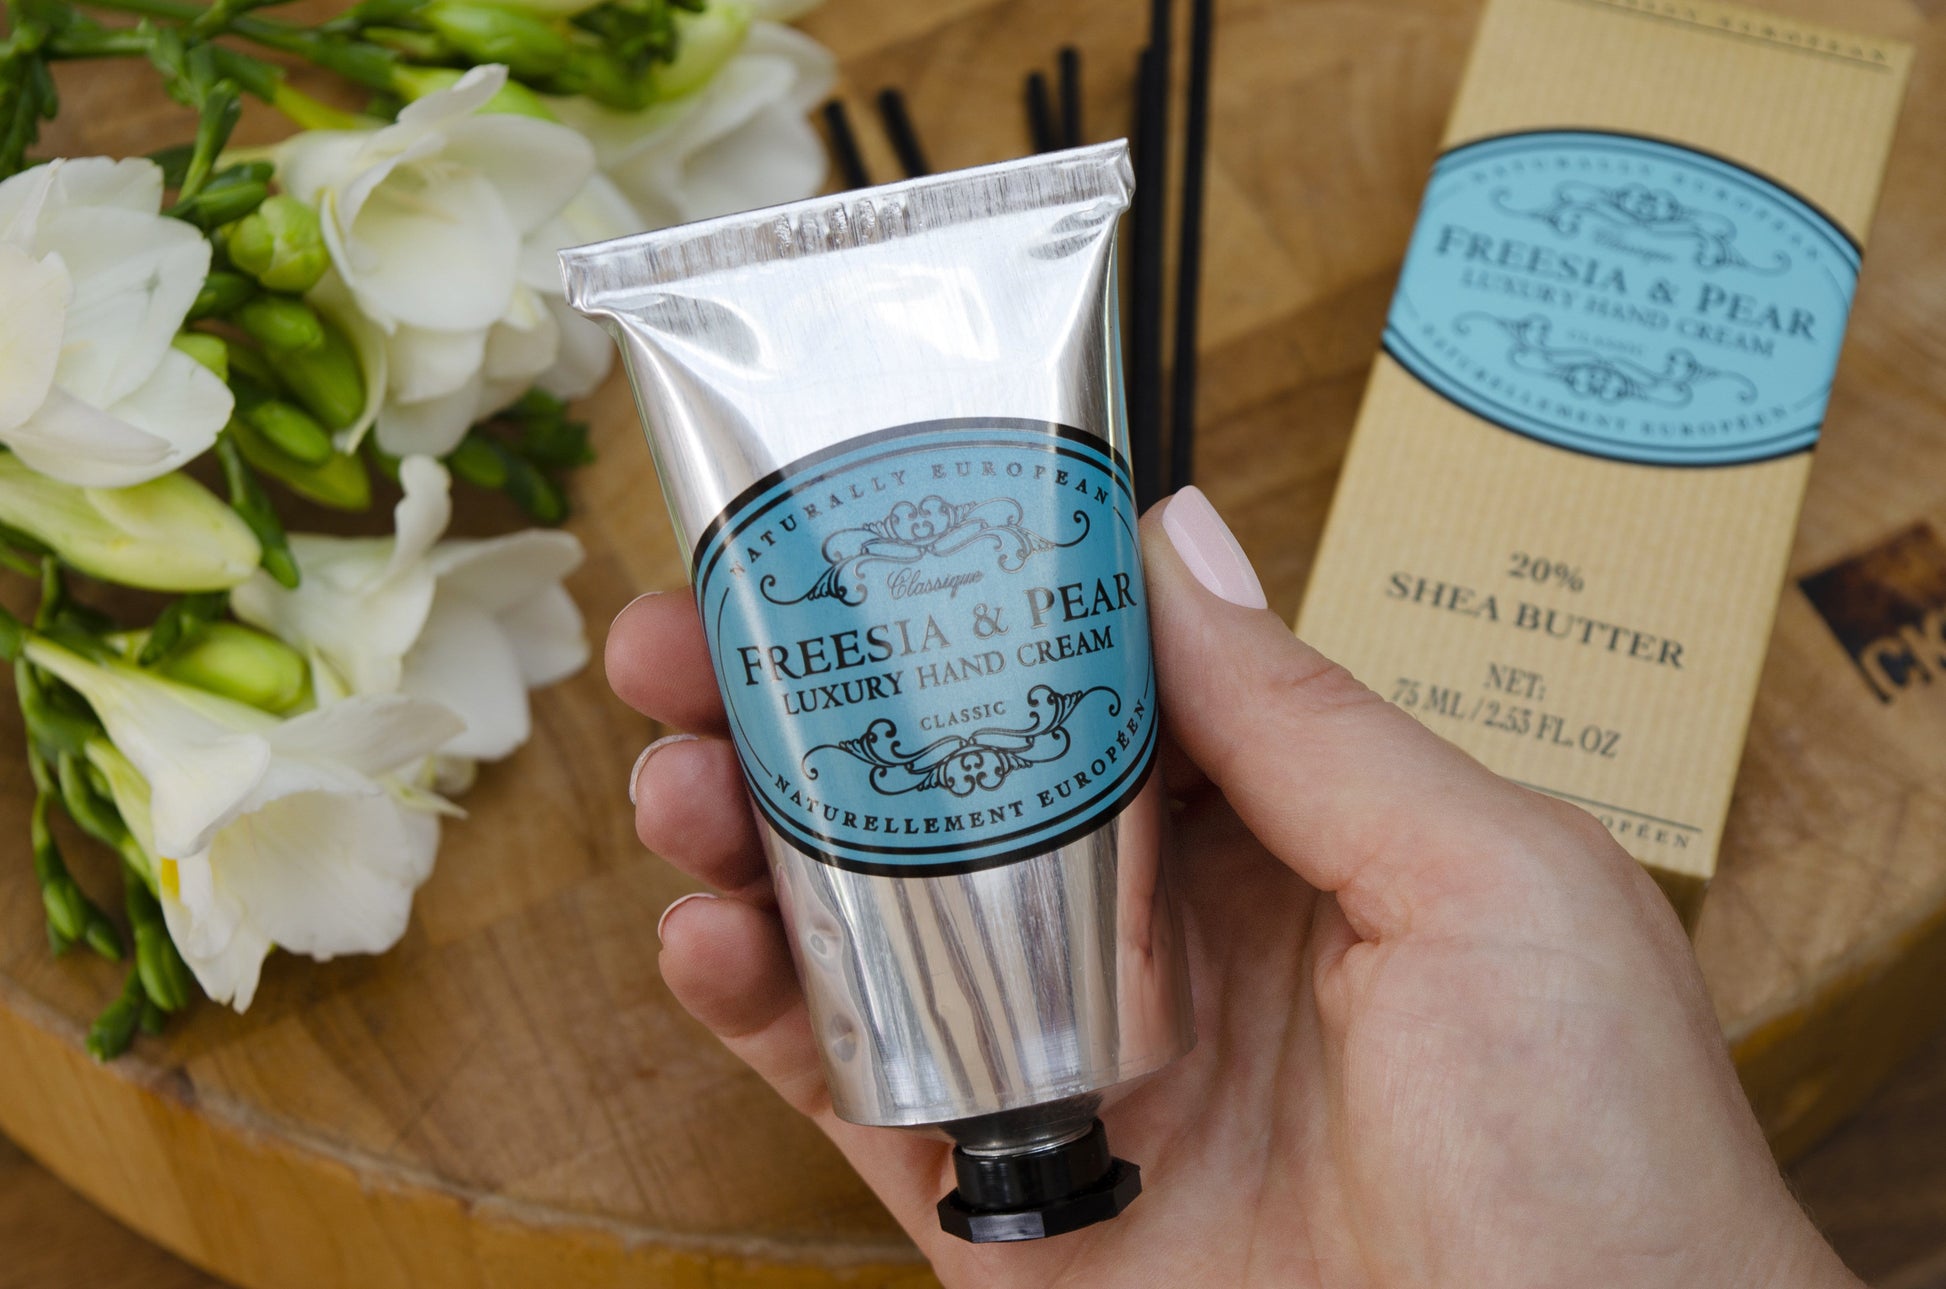 Holding the Naturally European Freesia & Pear Luxury Hand Cream by Somerset Toiletry Co. 